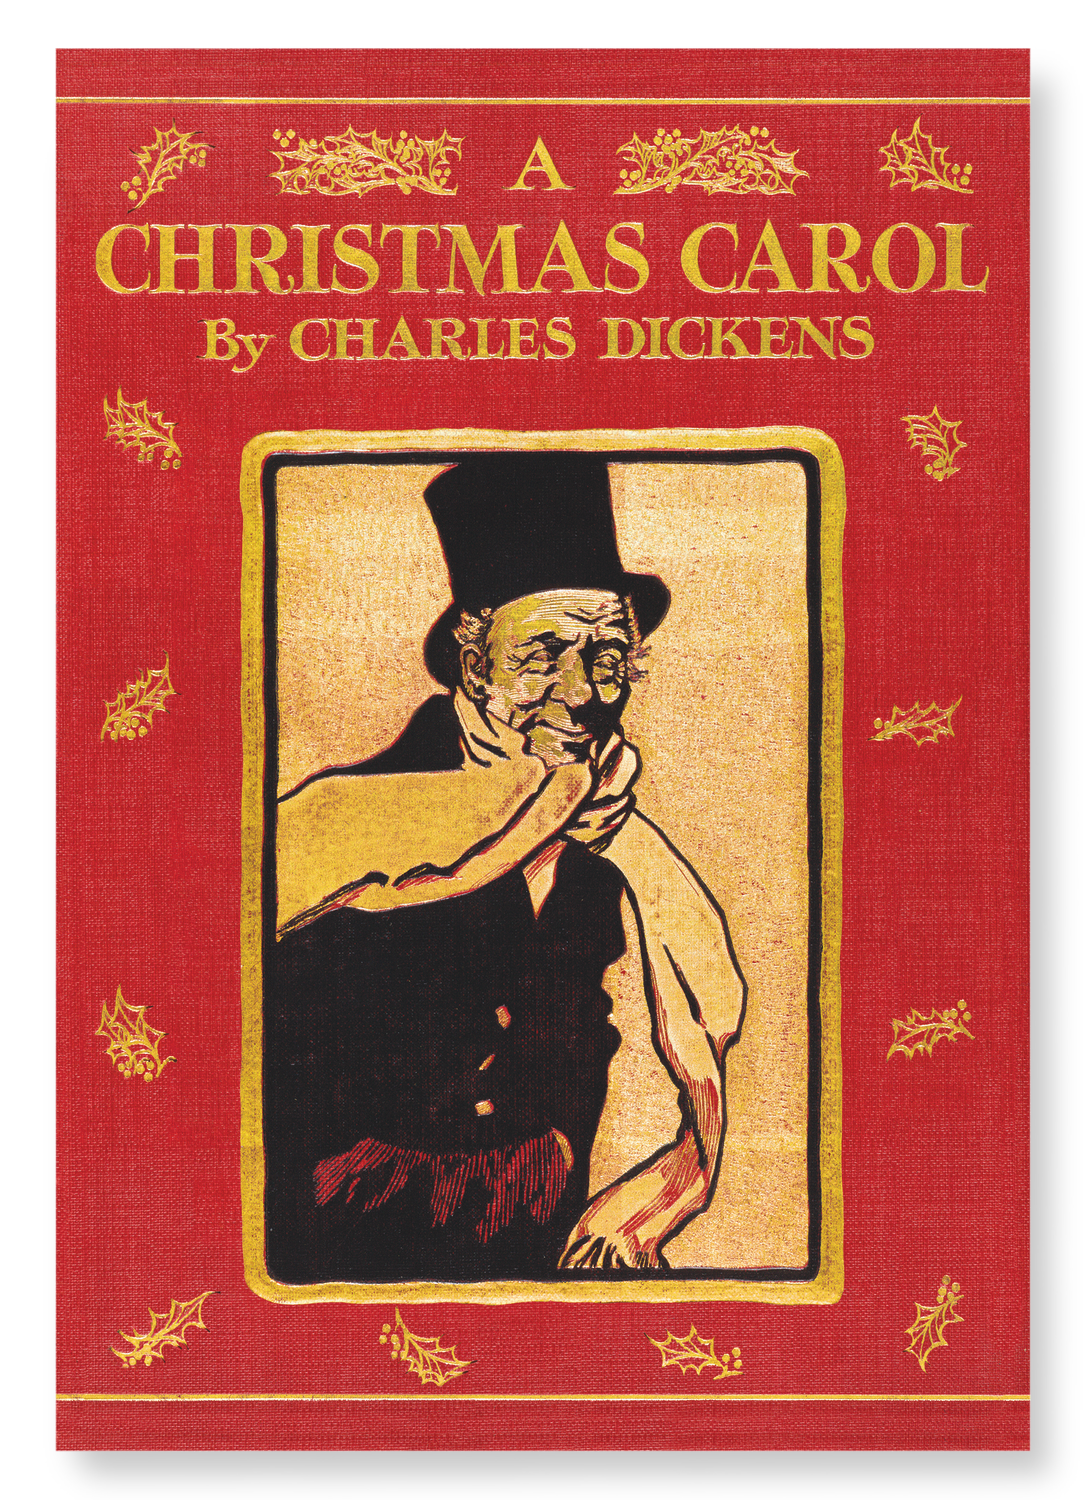 A CHRISTMAS CAROL FRONT COVER (1911): Victorian Art Print